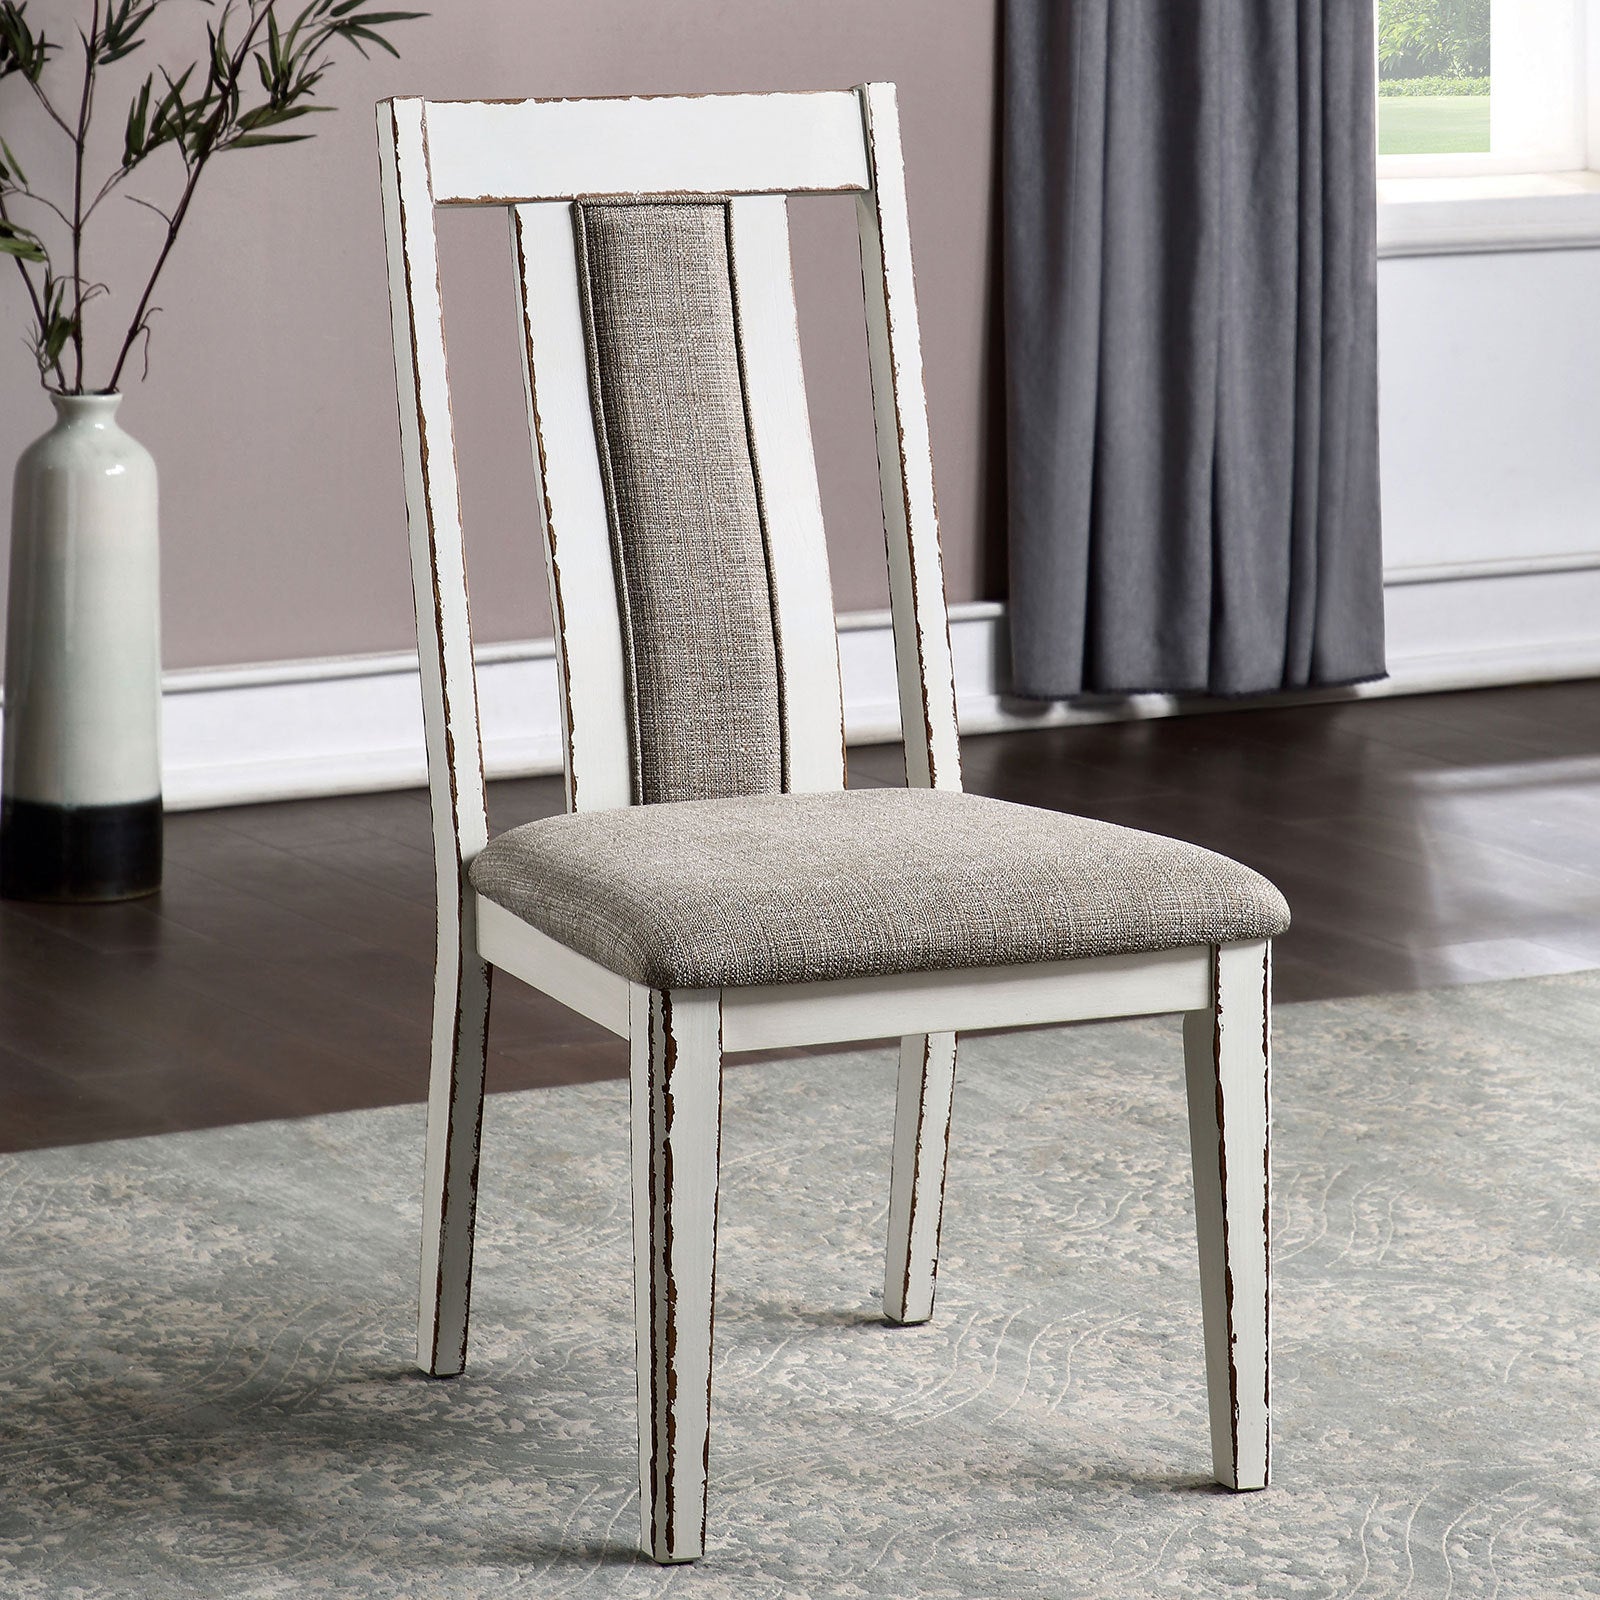 Classic Weathered White Warm Gray Set of 2 Side Chairs warm grey-dining